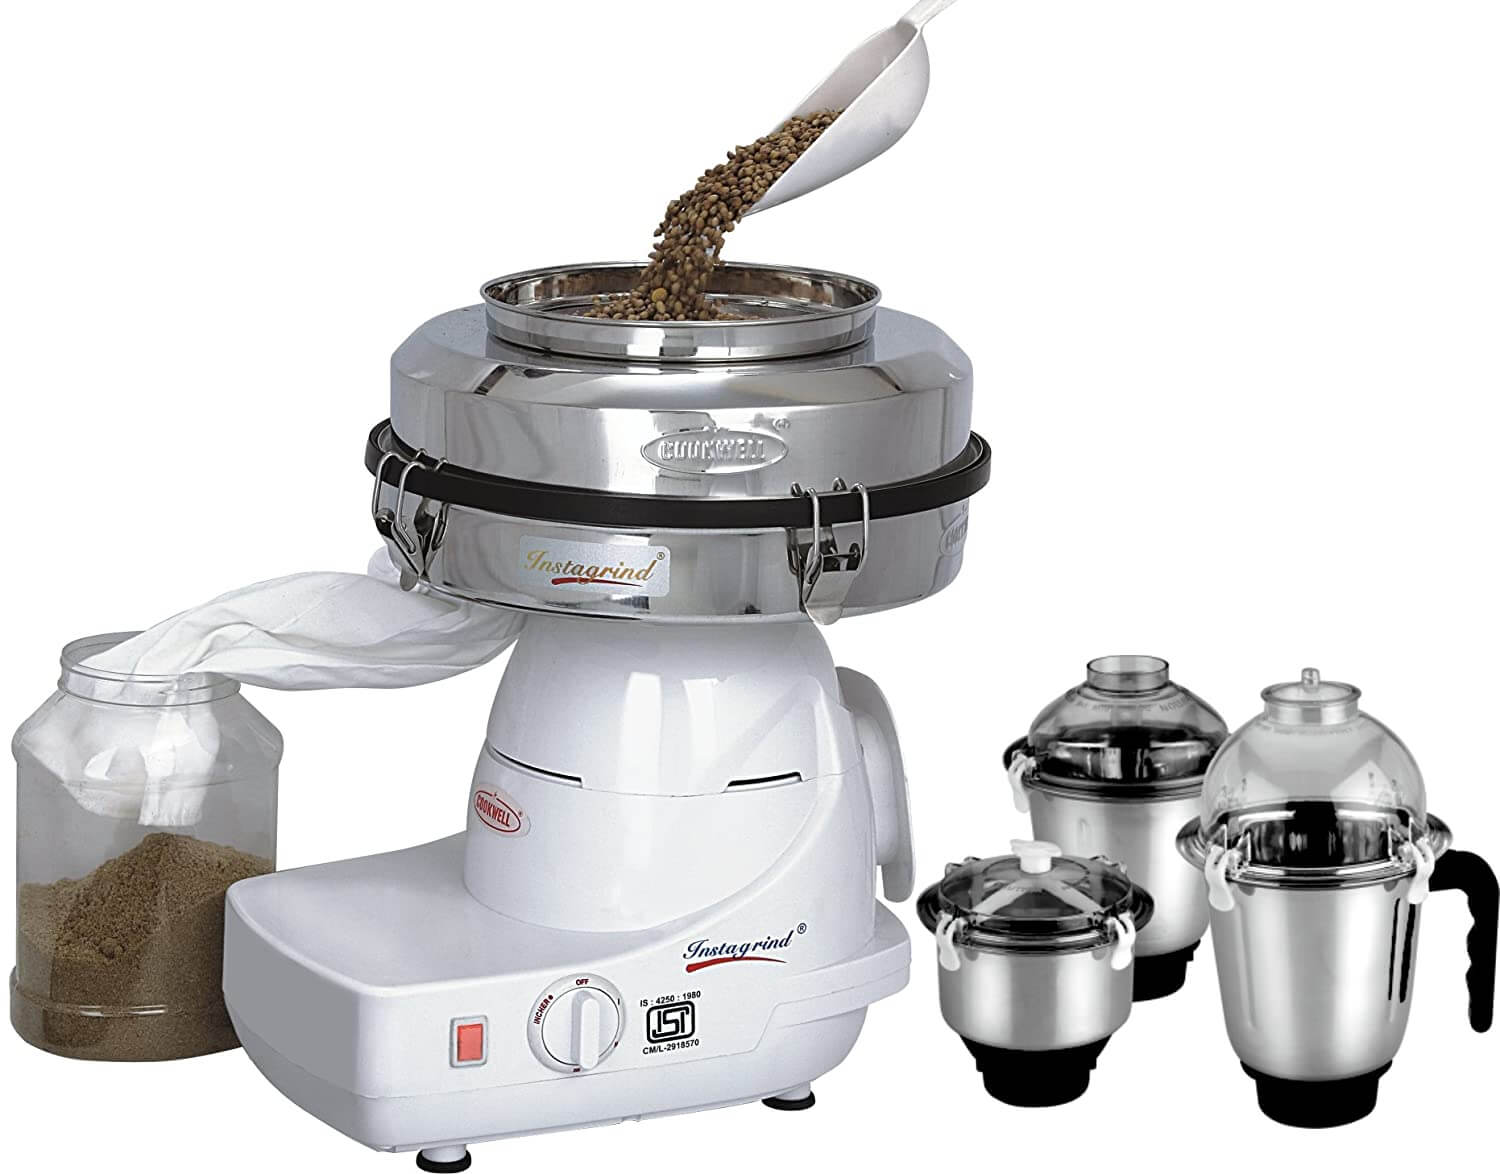 COOKWELL Instagrind 750W Mixer Grinder & Flour Mill with 3 Jars 